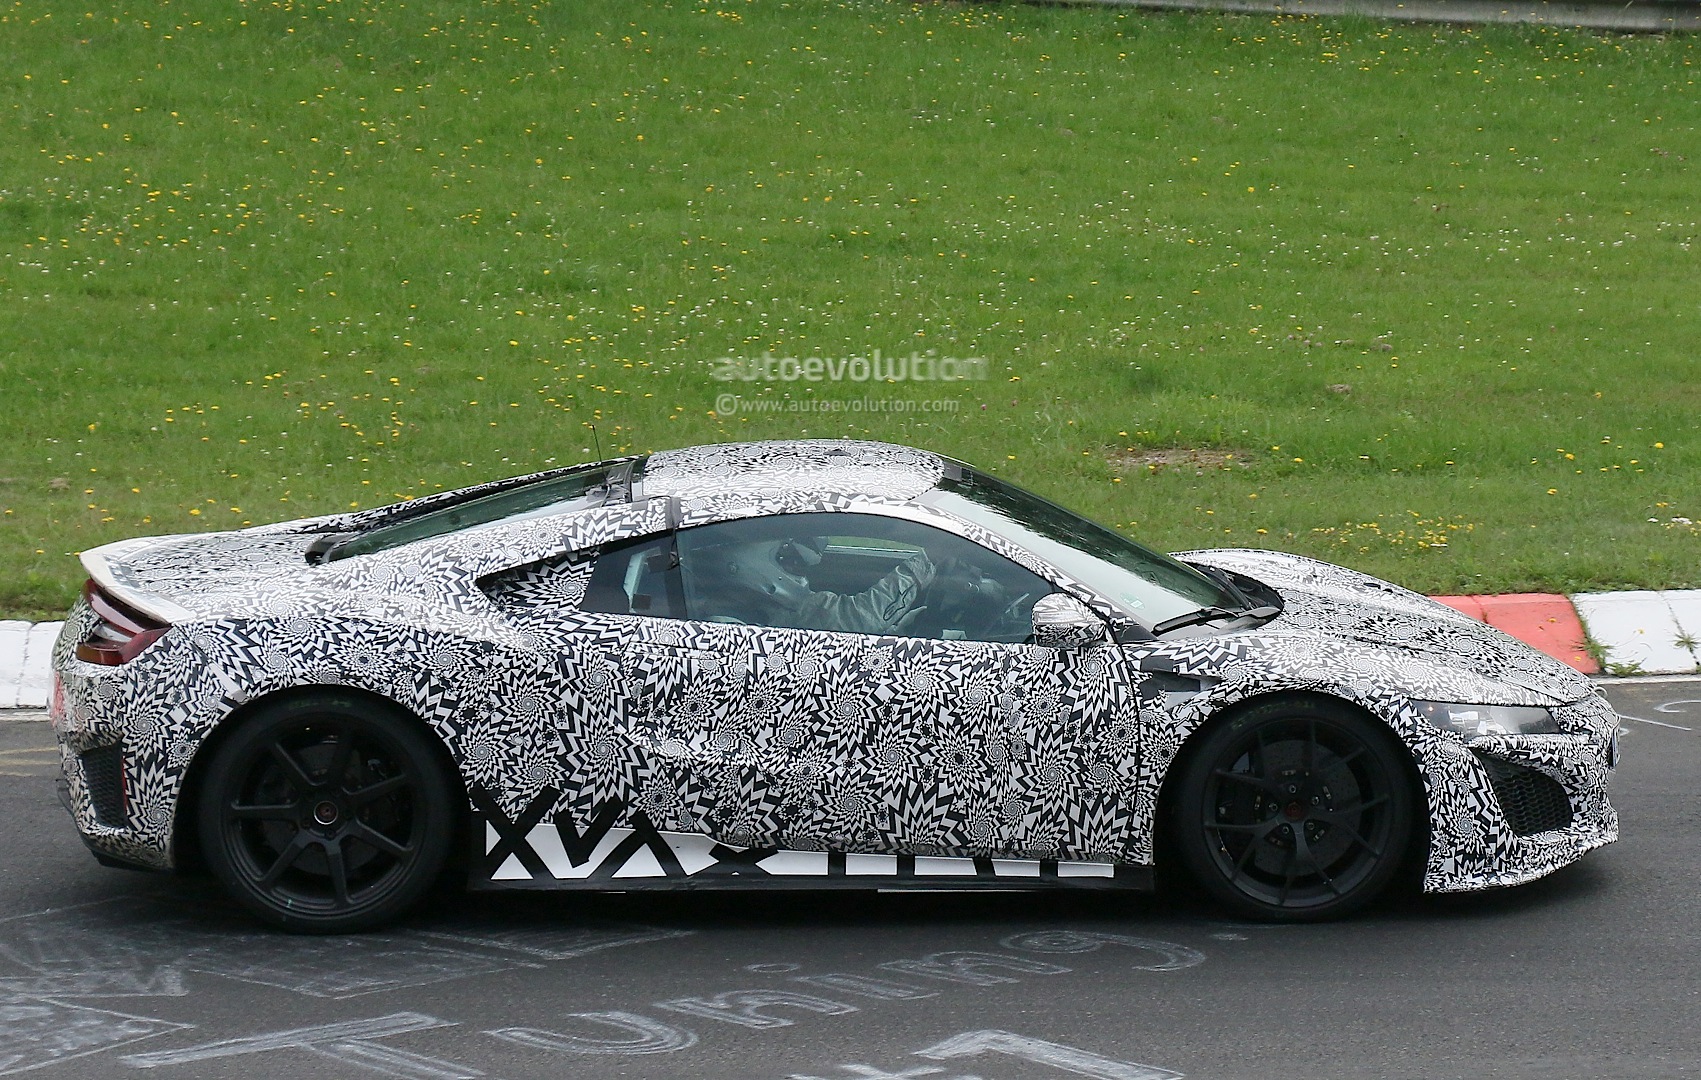 production-2015-acura-nsx-spied-during-nurburgring-testing-photo-gallery_4.jpg